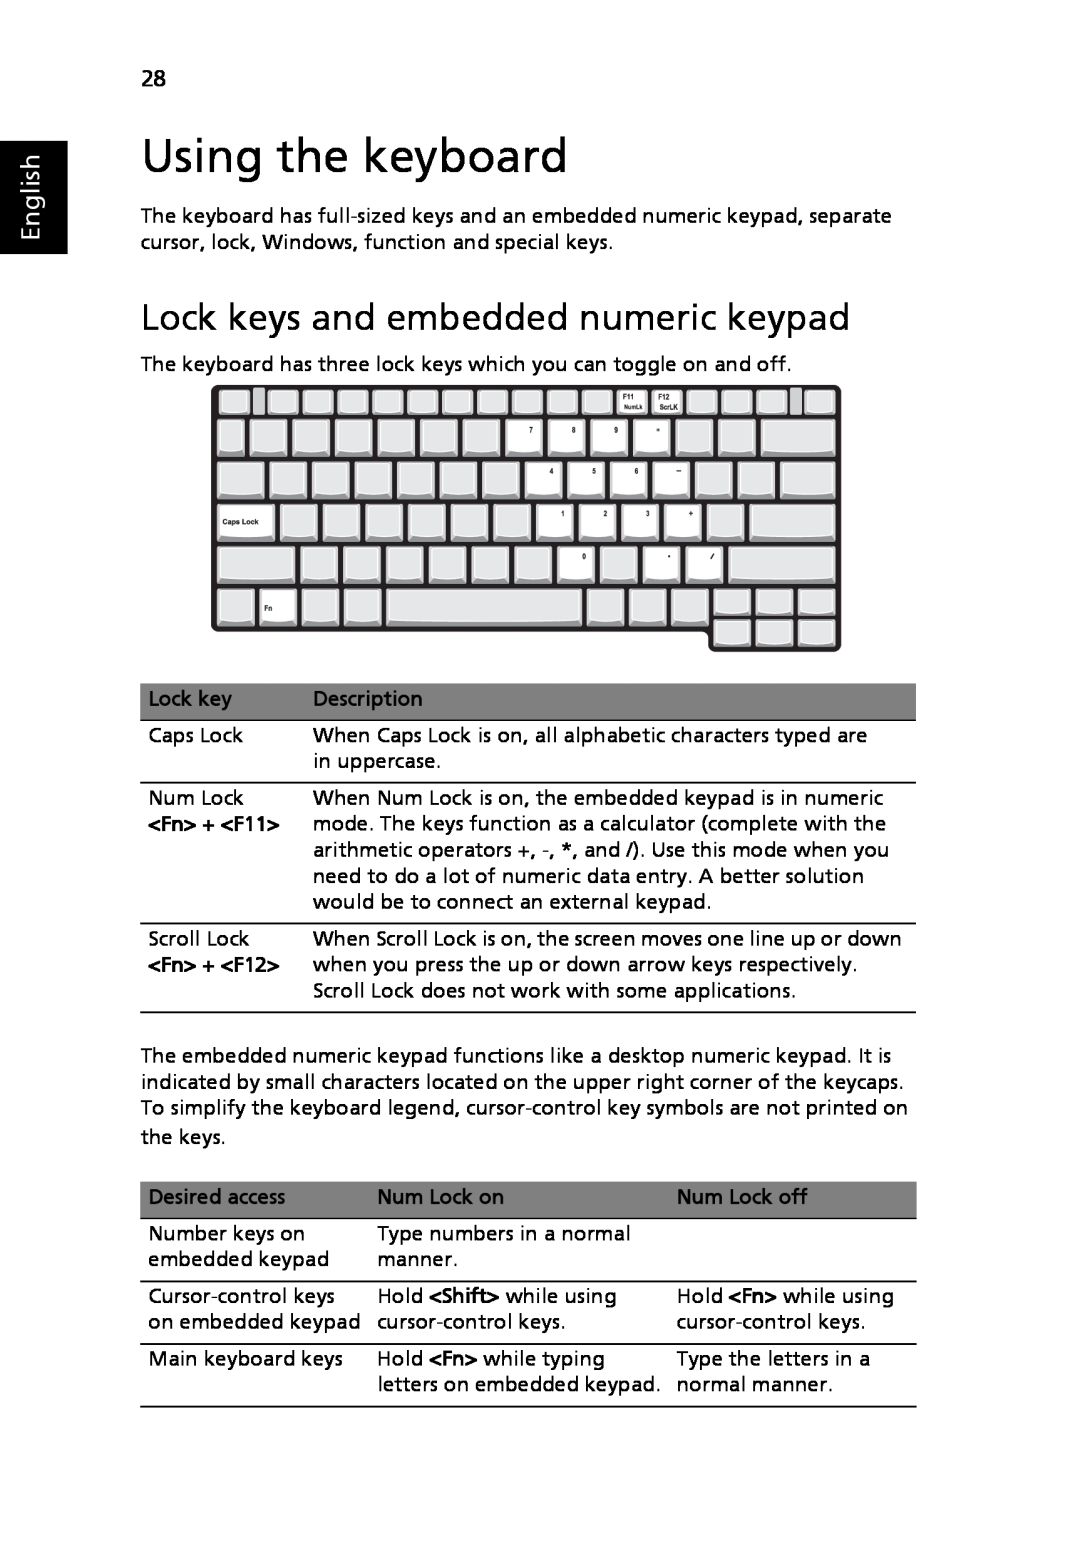 Acer 3030 Series, 3040 Series manual Using the keyboard, Lock keys and embedded numeric keypad, English 